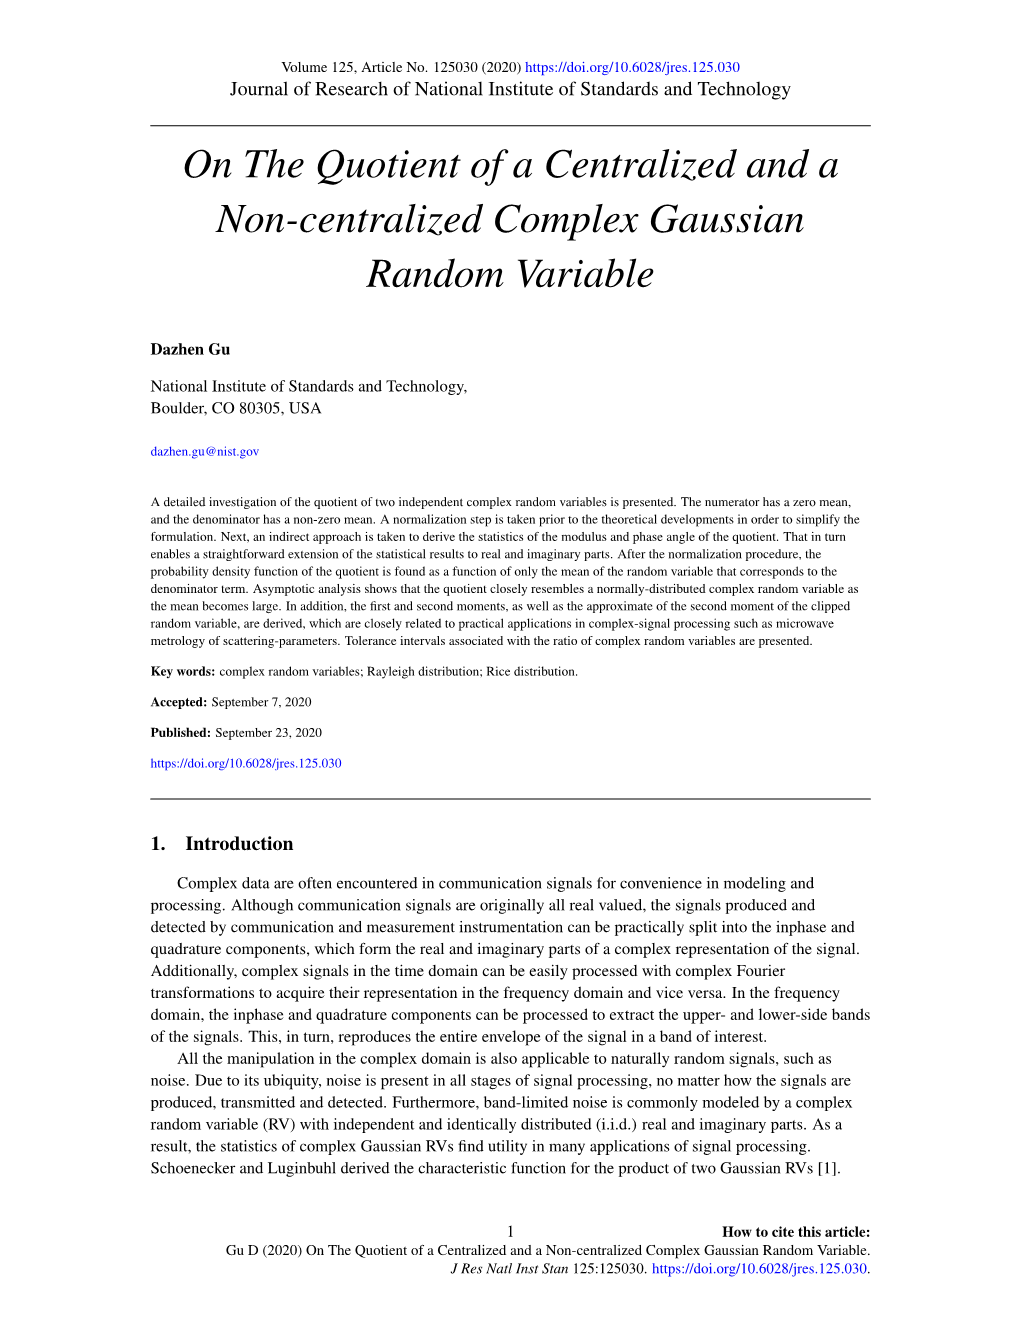 On the Quotient of a Centralized and a Non-Centralized Complex Gaussian Random Variable